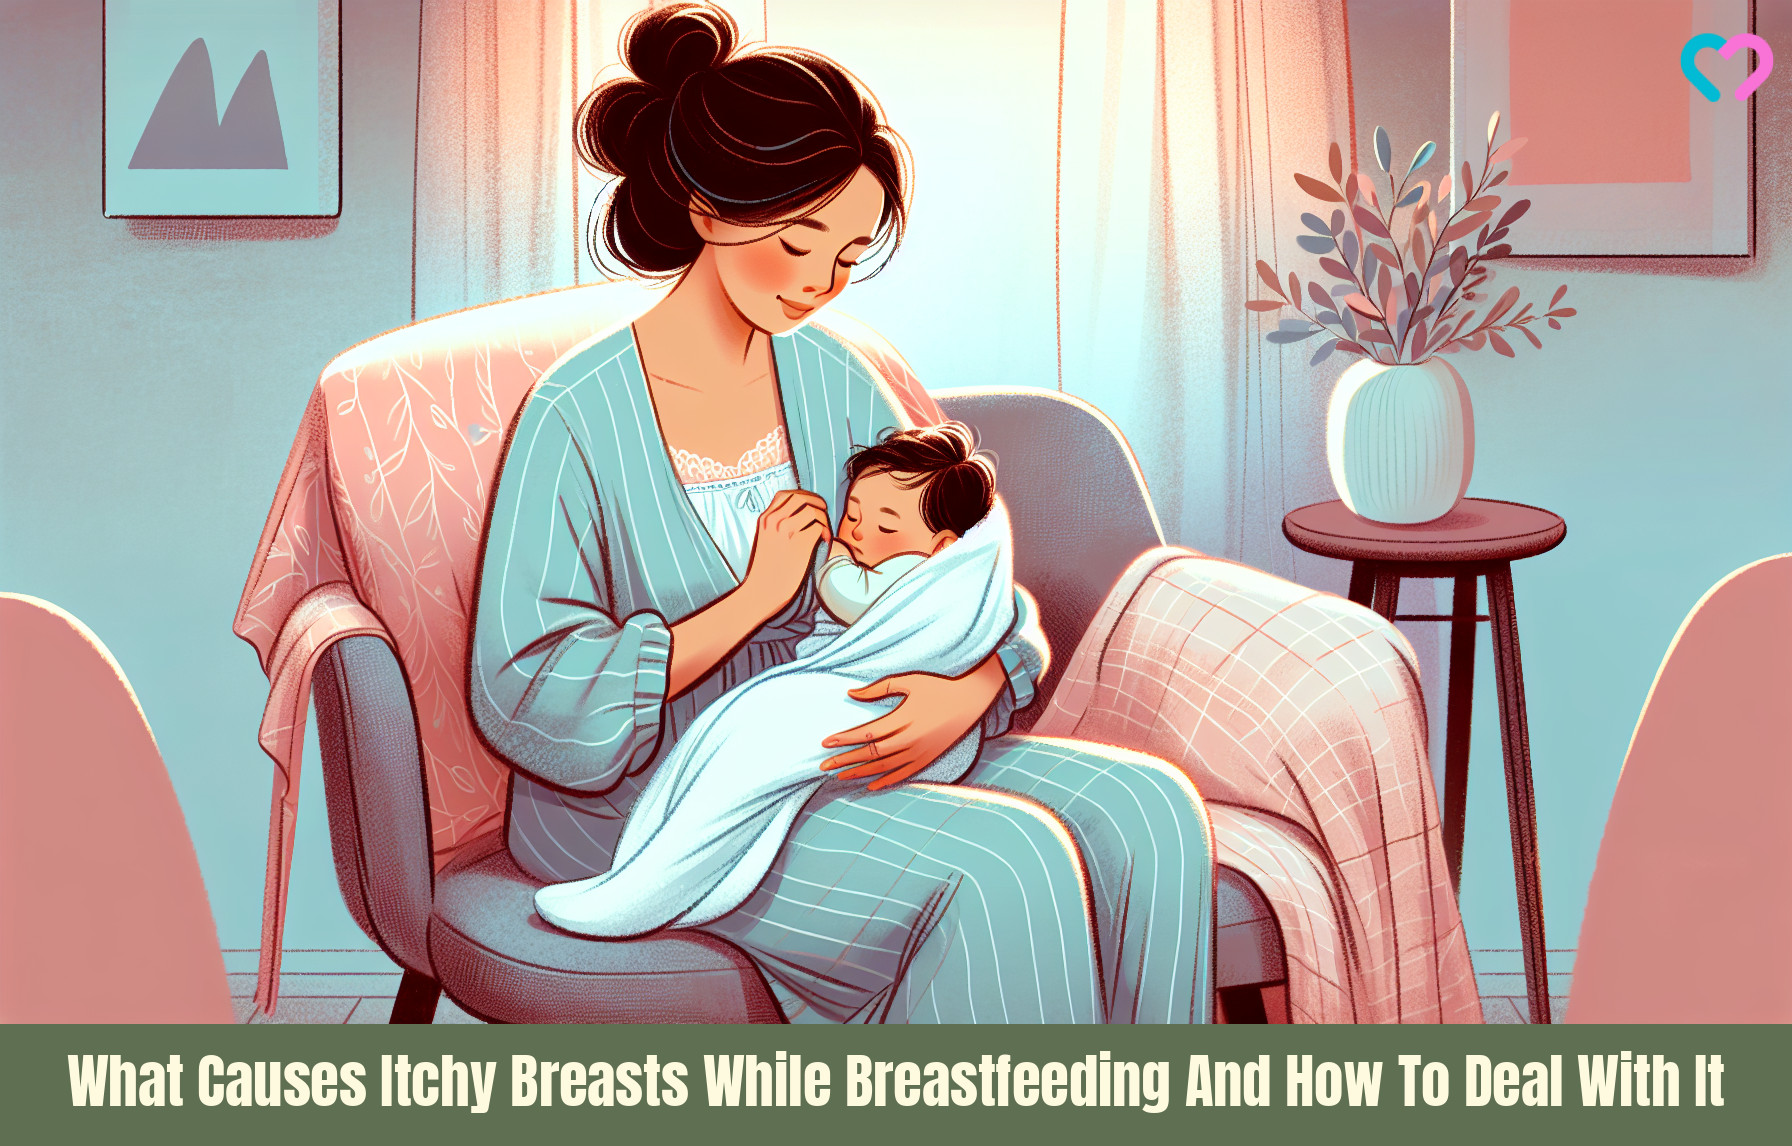 Itchy Breasts While Breastfeeding_illustration